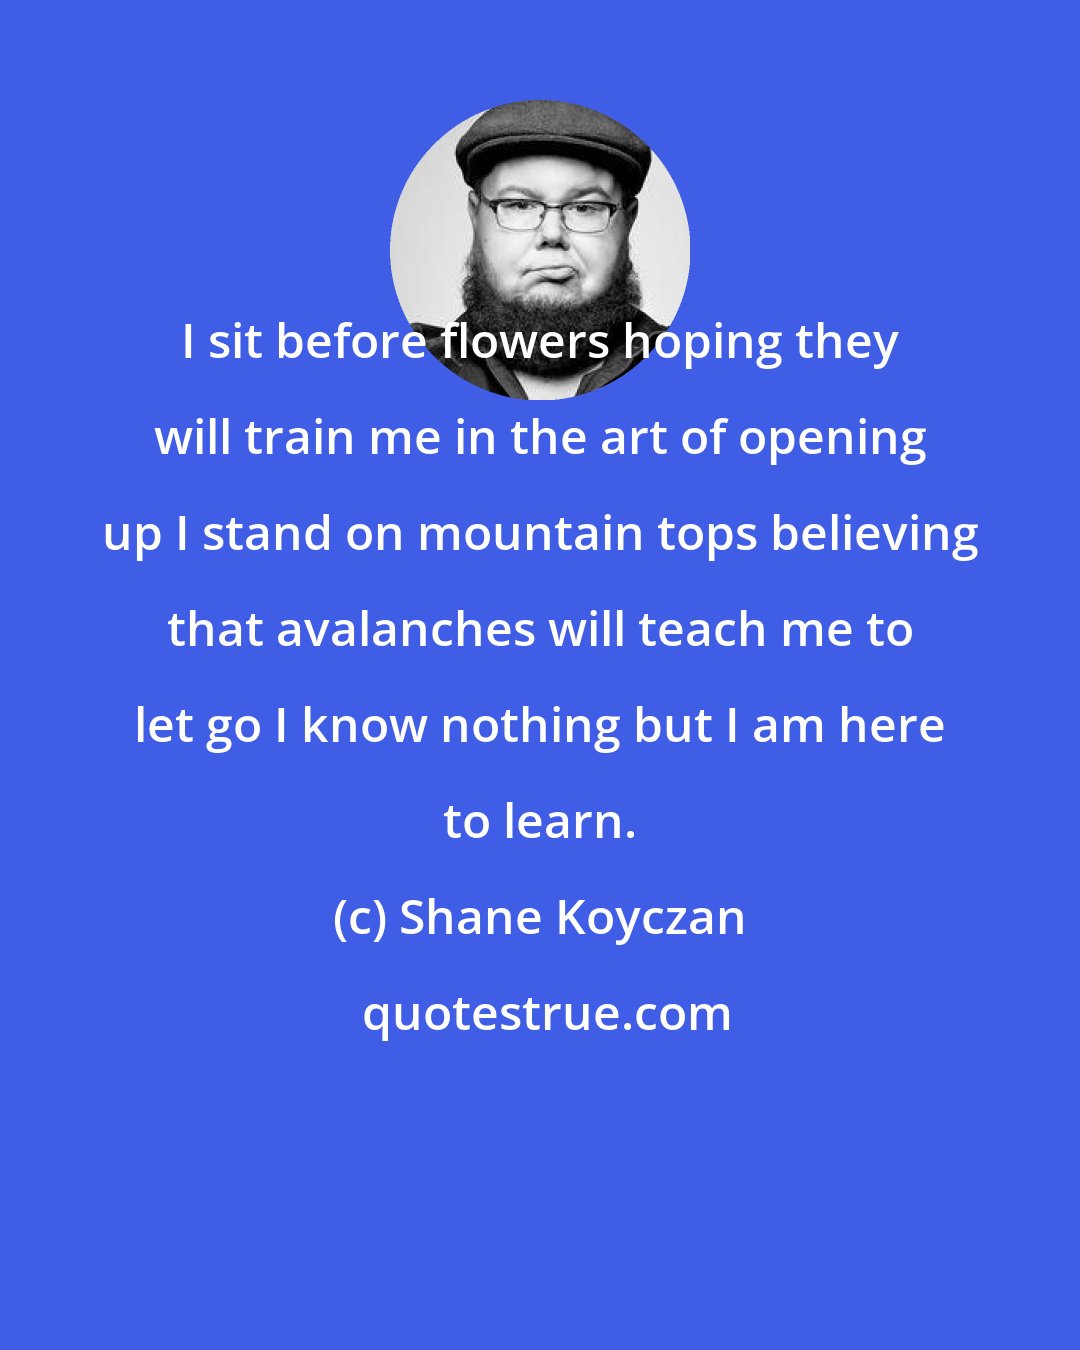 Shane Koyczan: I sit before flowers hoping they will train me in the art of opening up I stand on mountain tops believing that avalanches will teach me to let go I know nothing but I am here to learn.